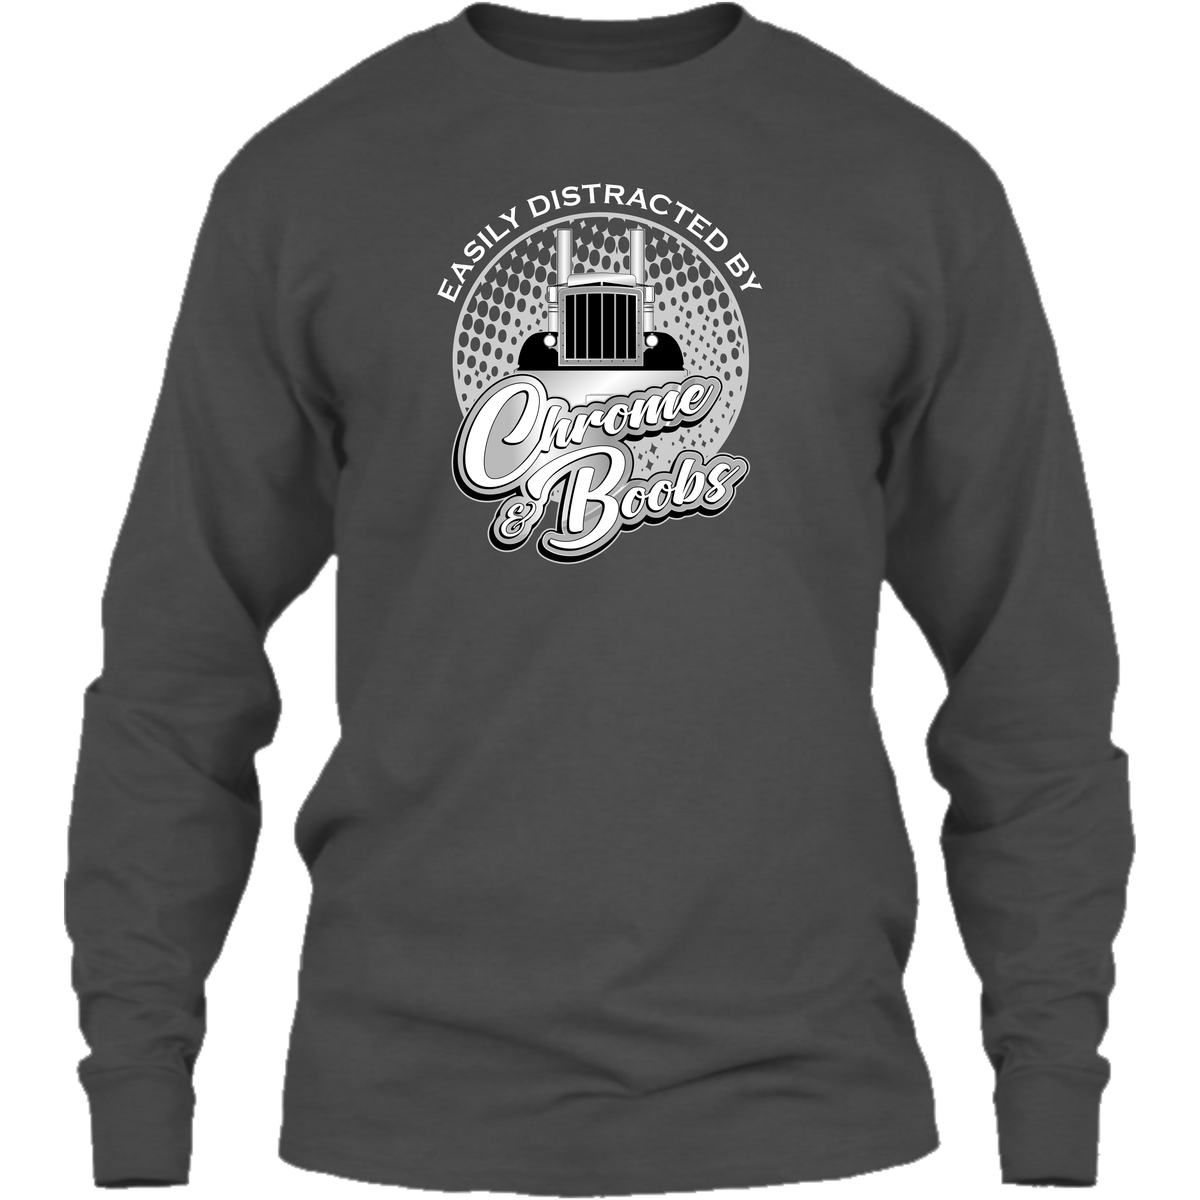 Long Sleeve - Easily Distracted by Chrome & Boobs - Peterbilt - Front Print